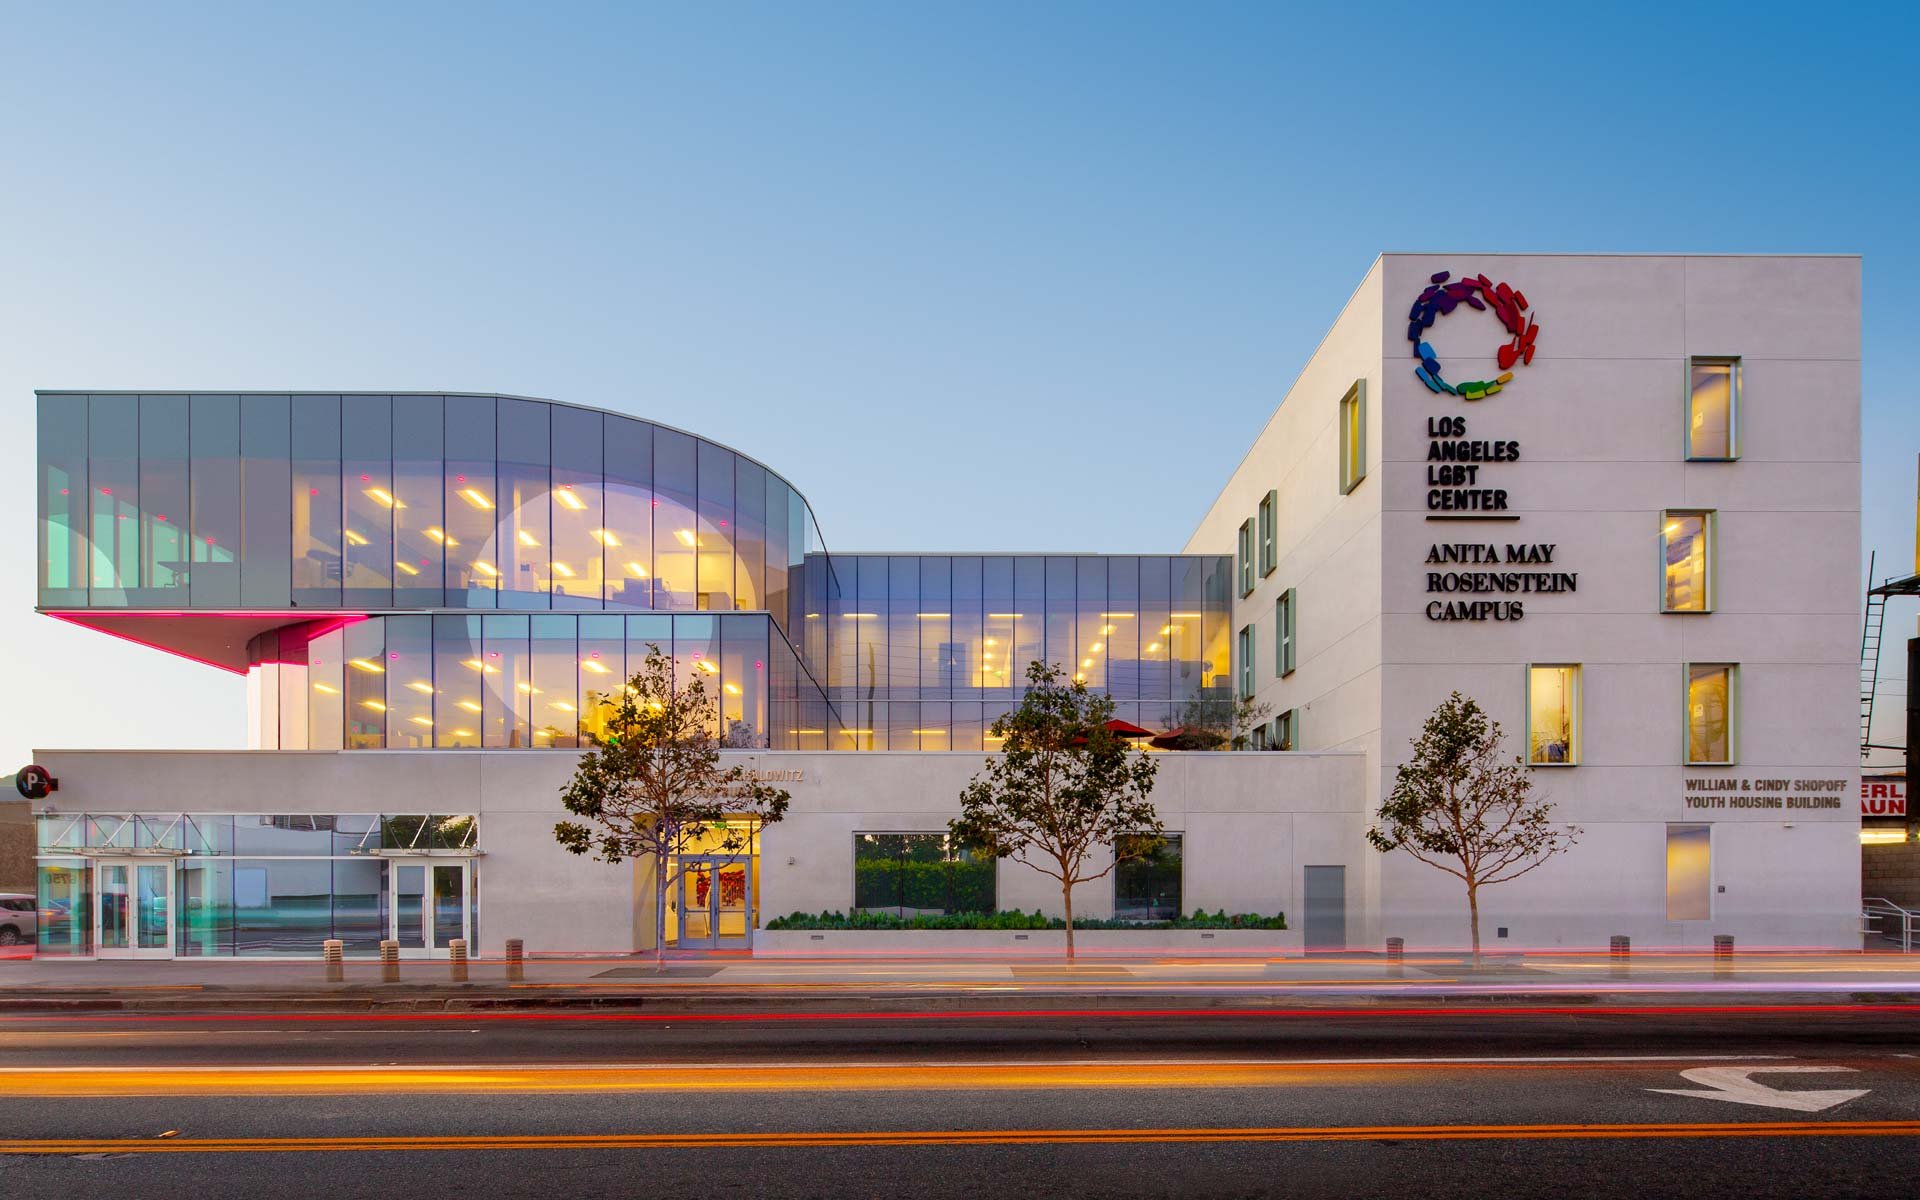  Los Angeles LGBT Center, Anita May Rosenstein Campus by  KFA Architecture .  Photo by Iwan Baan  